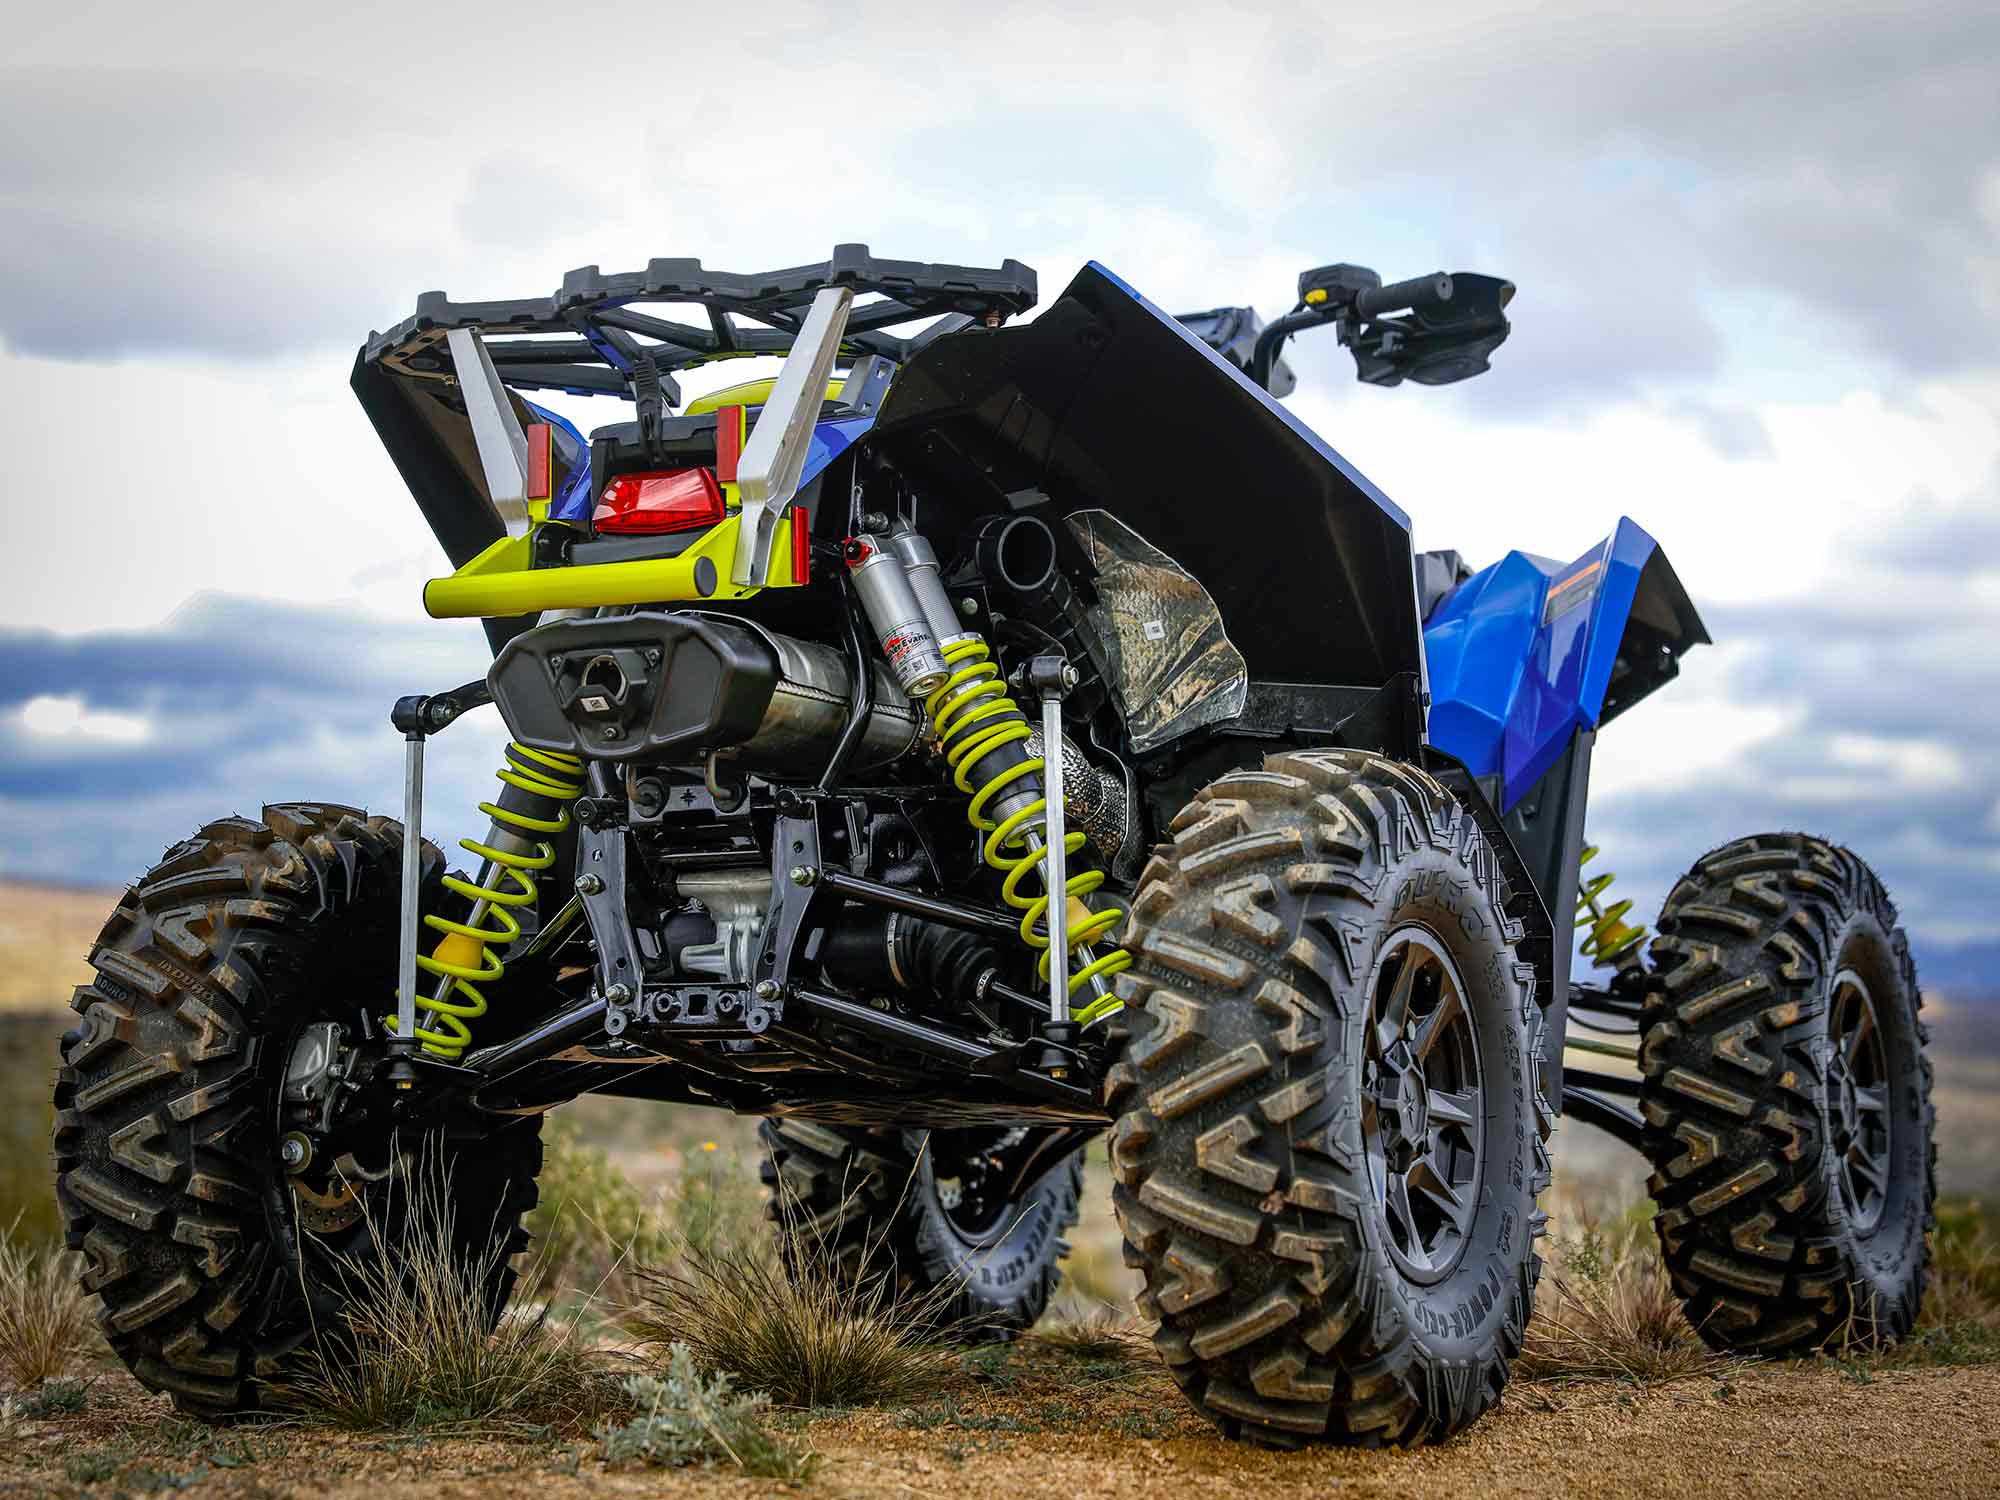 Top 12 4x4 ATVs of All Time